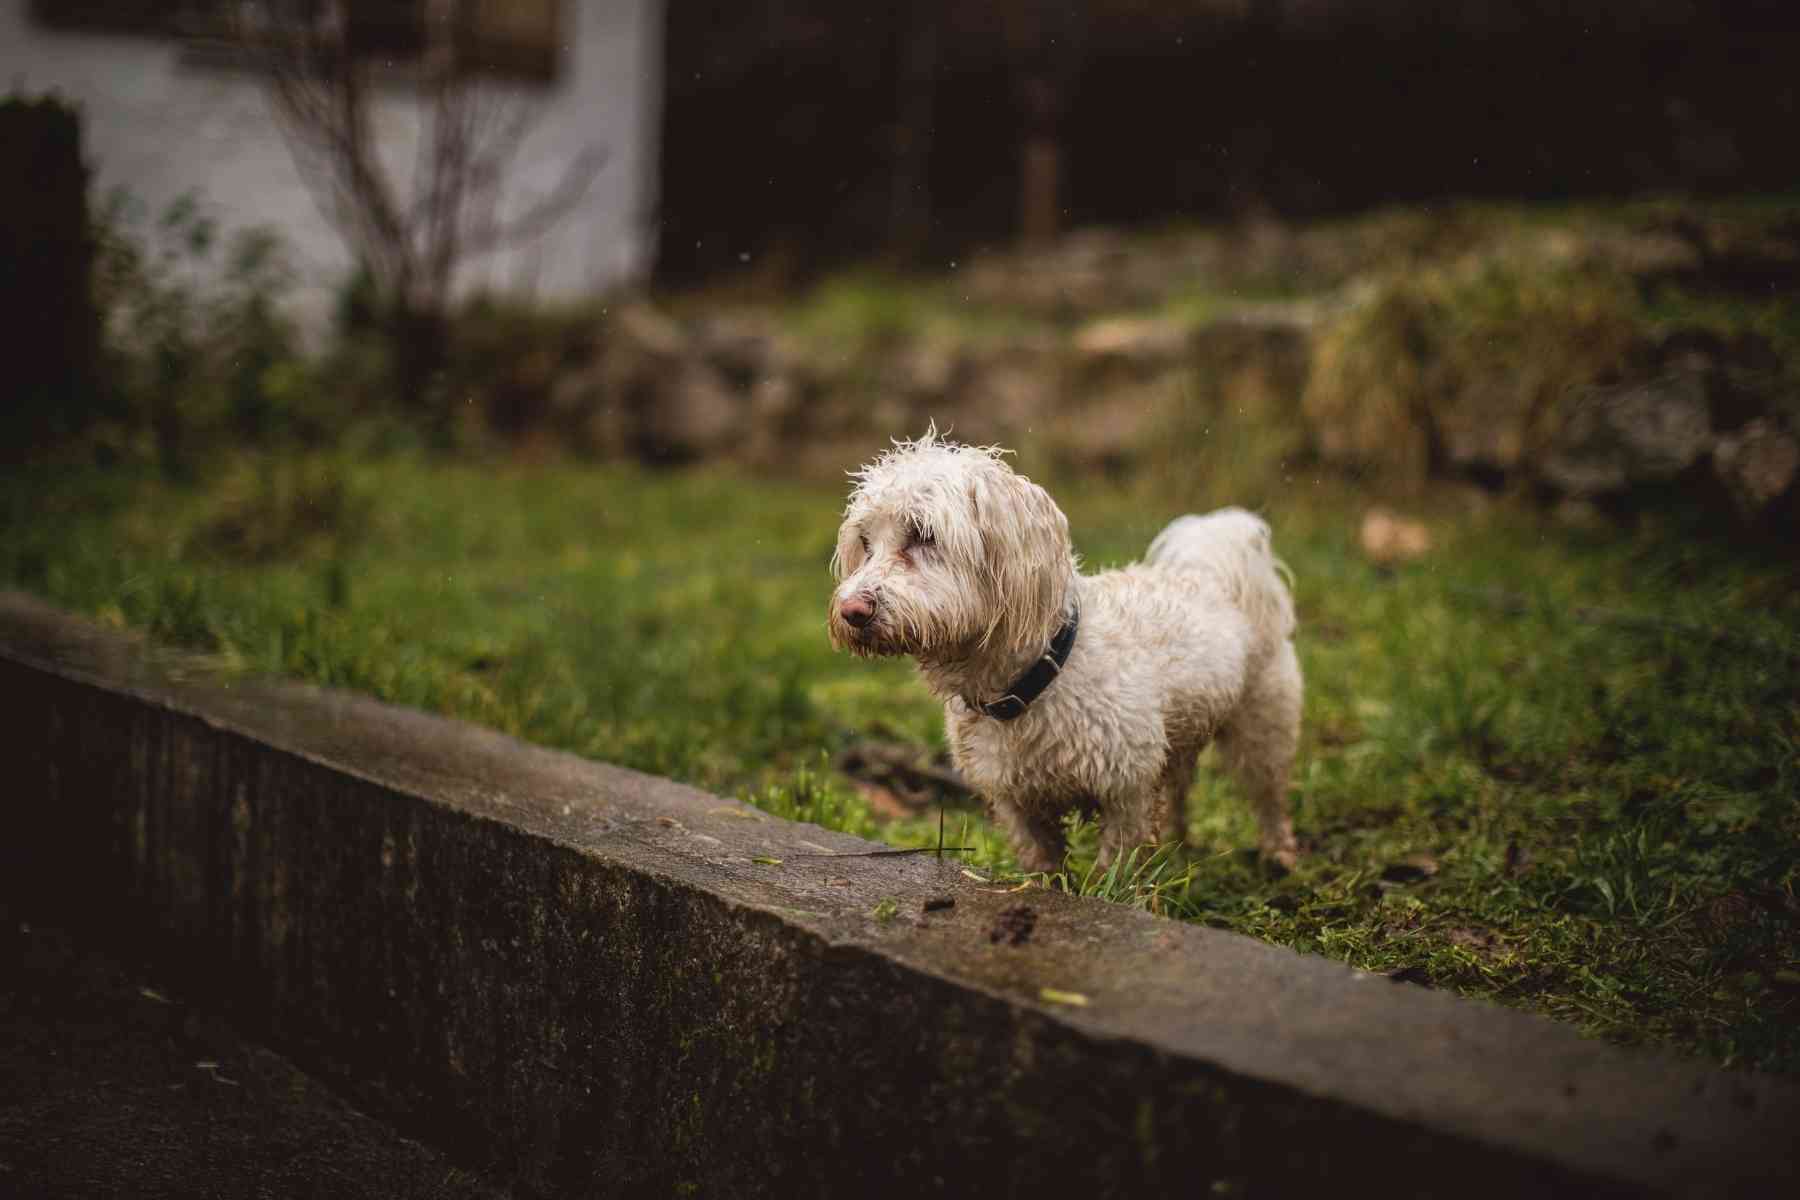 Small white dog staying out in the rain looking sad